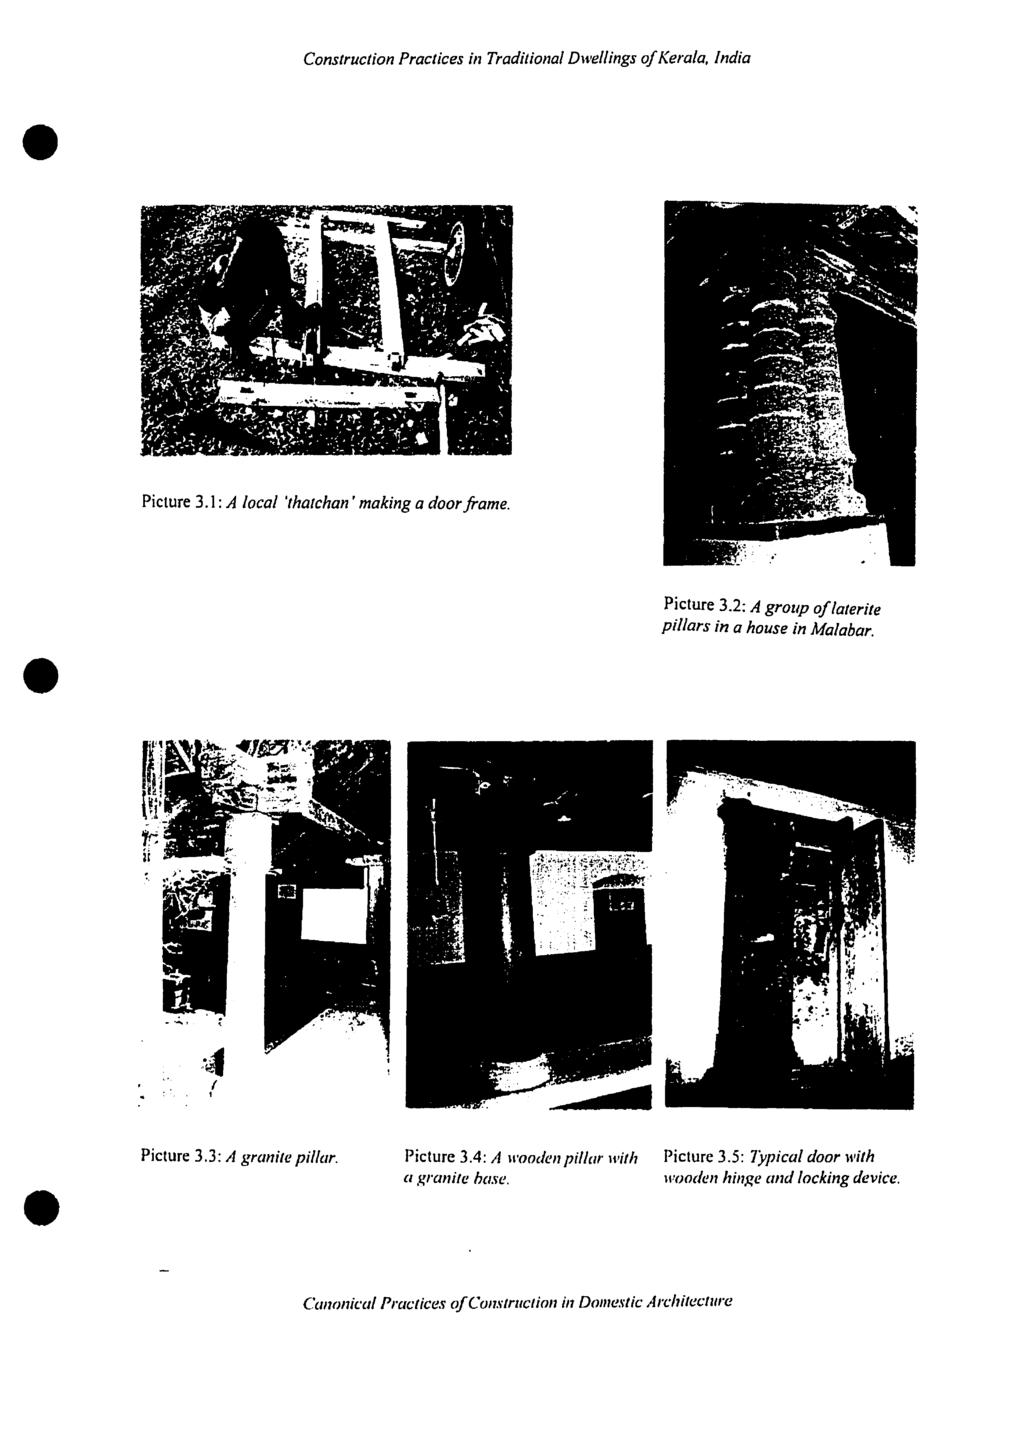 Construction Practices in Traditional Dwellings 0/Kerala. India Picture 3.1: A local 'thatchan' making a door frame. Picture 3.2: A group oflaterite pillars in a house in Malabar...4 ~ 11 Picture 3.